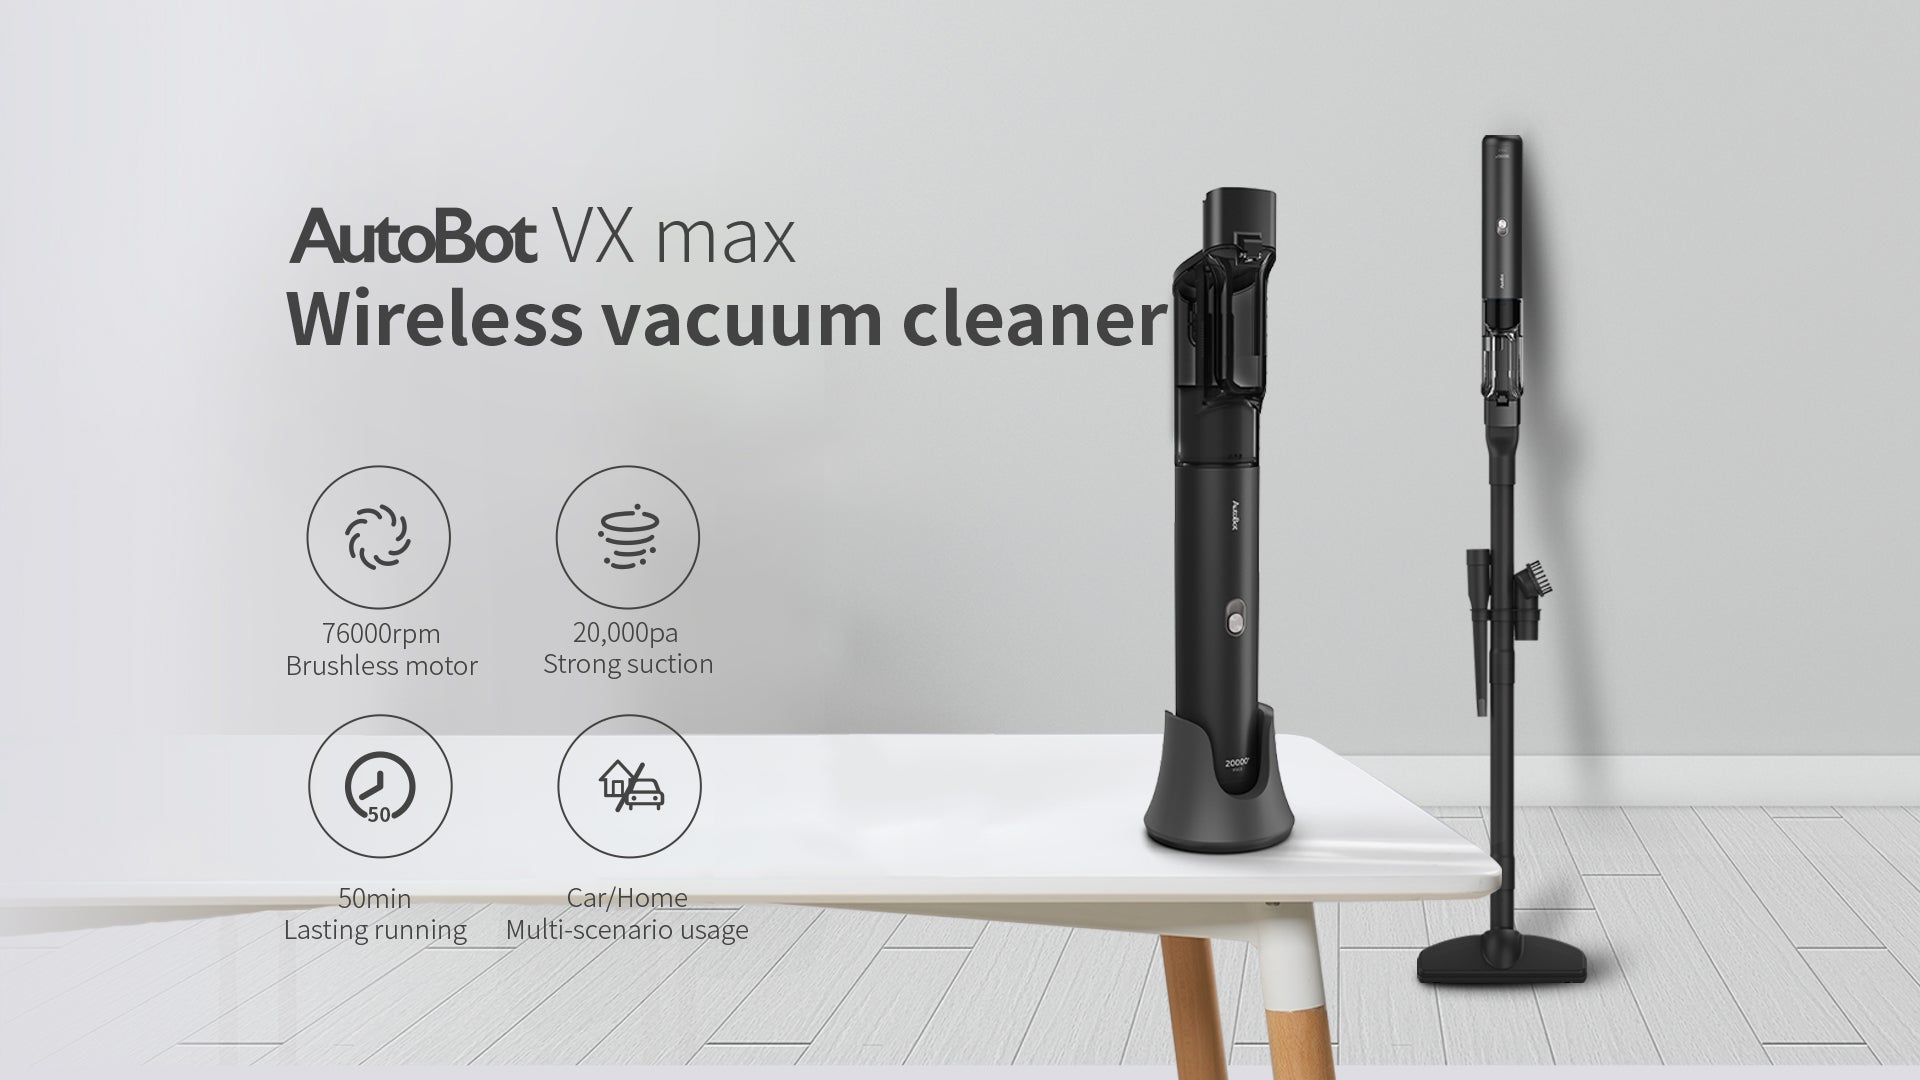 AutoBot VX max wireless vacuum cleaner, 10000rpm Brushless motor, 20000pa Strong suction,40min lasting running,Car and home multi-scenario usage